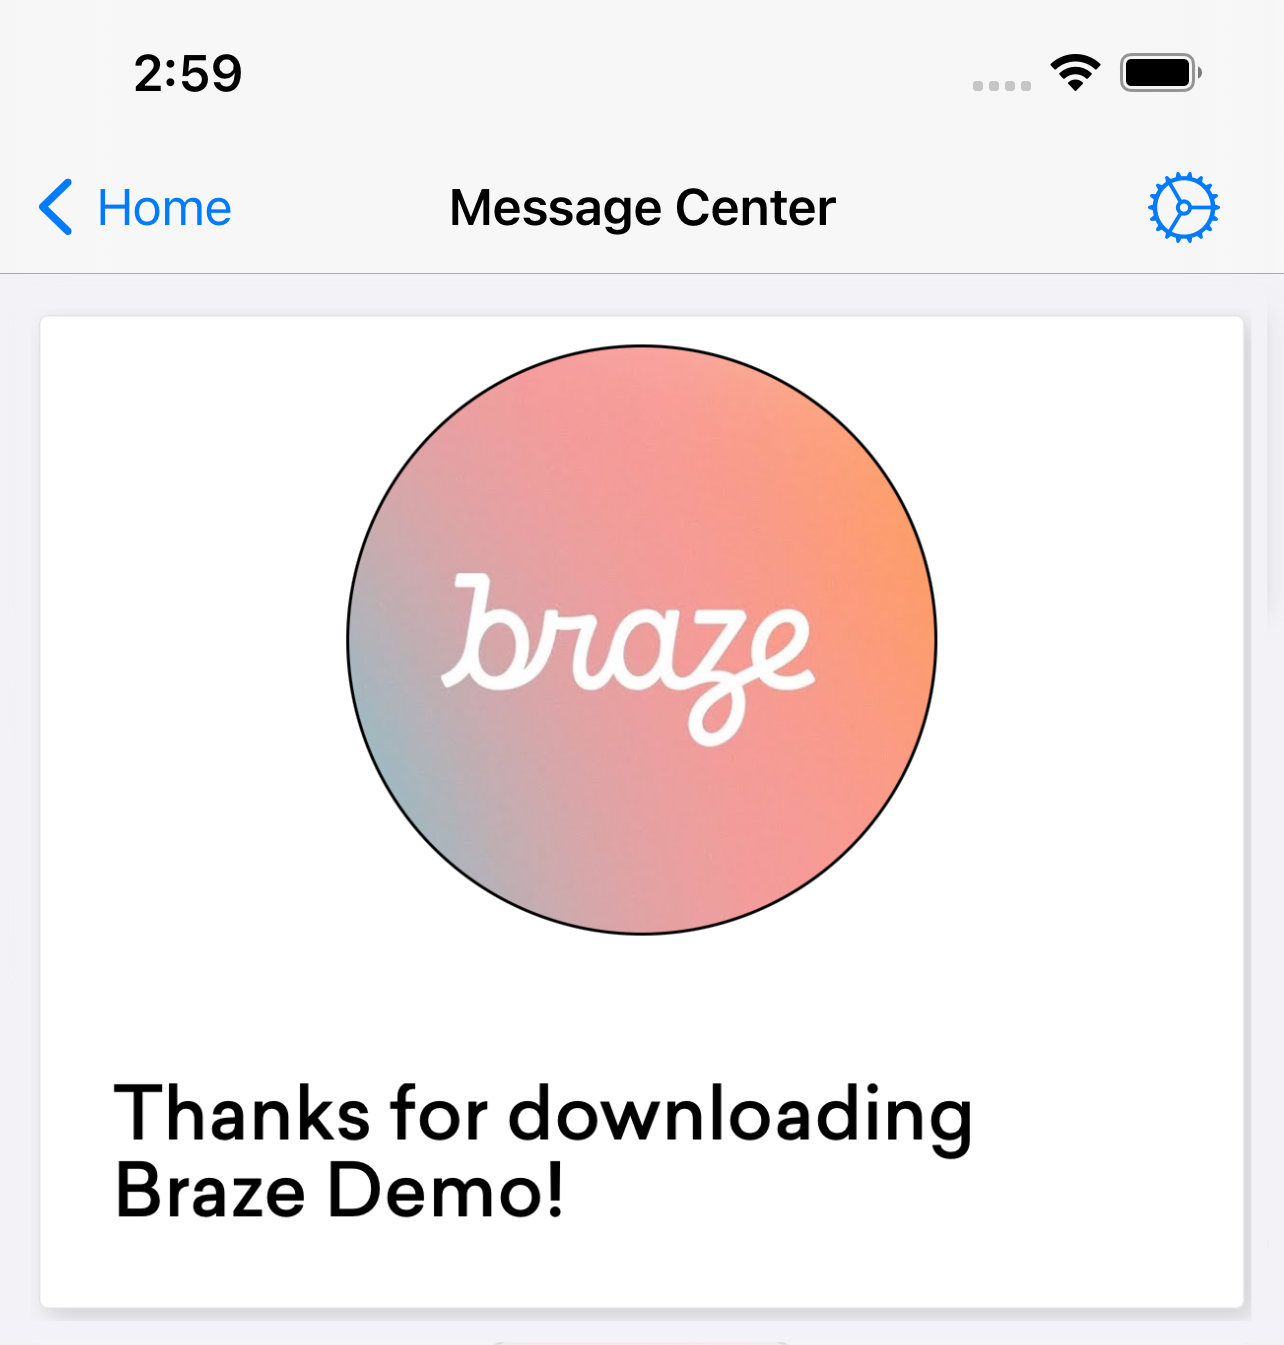 A classic Content Card. A classic Content Card shows an image in the center of the card with the words "Thanks for downloading Braze Demo" underneath.